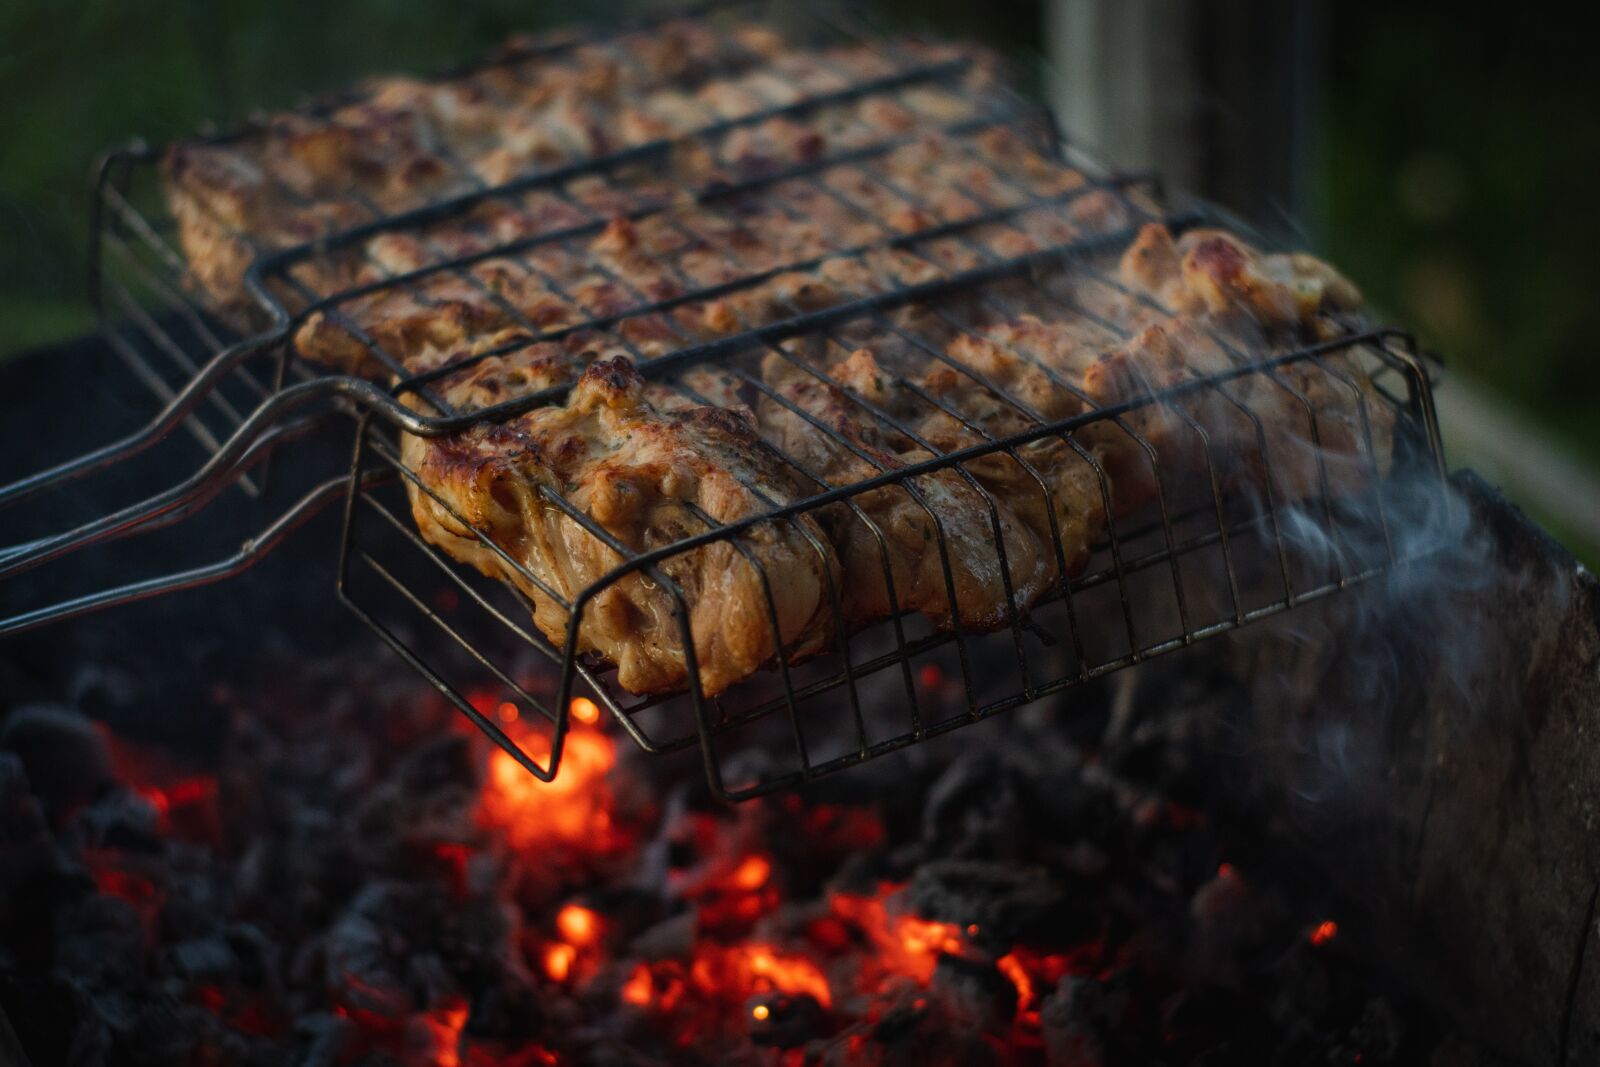 Sony a6400 sample photo. Meat, grill, coals photography